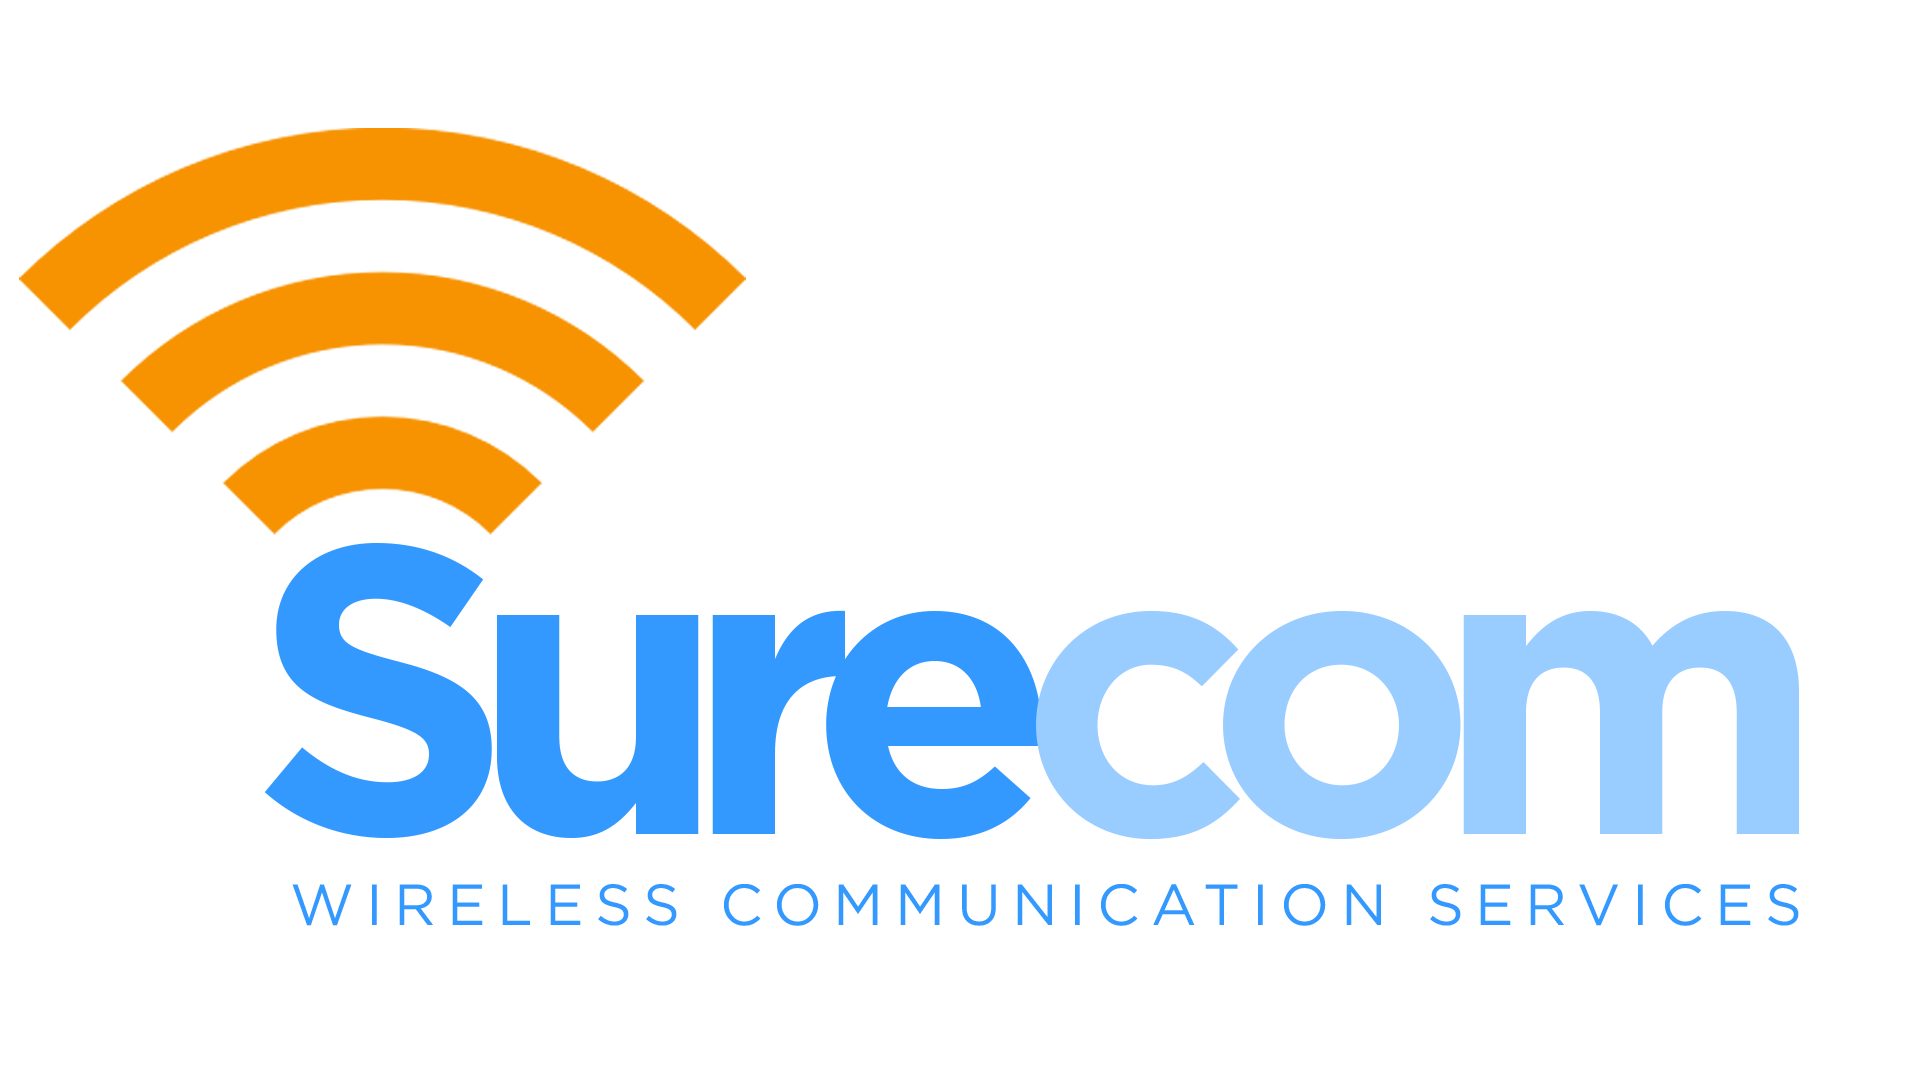 SURECOM Wireless Communication Services offers a variety of portable handheld two-way radios for private and corporate use. We also accept SUBSCRIPTIONS & short term RENTAL services.